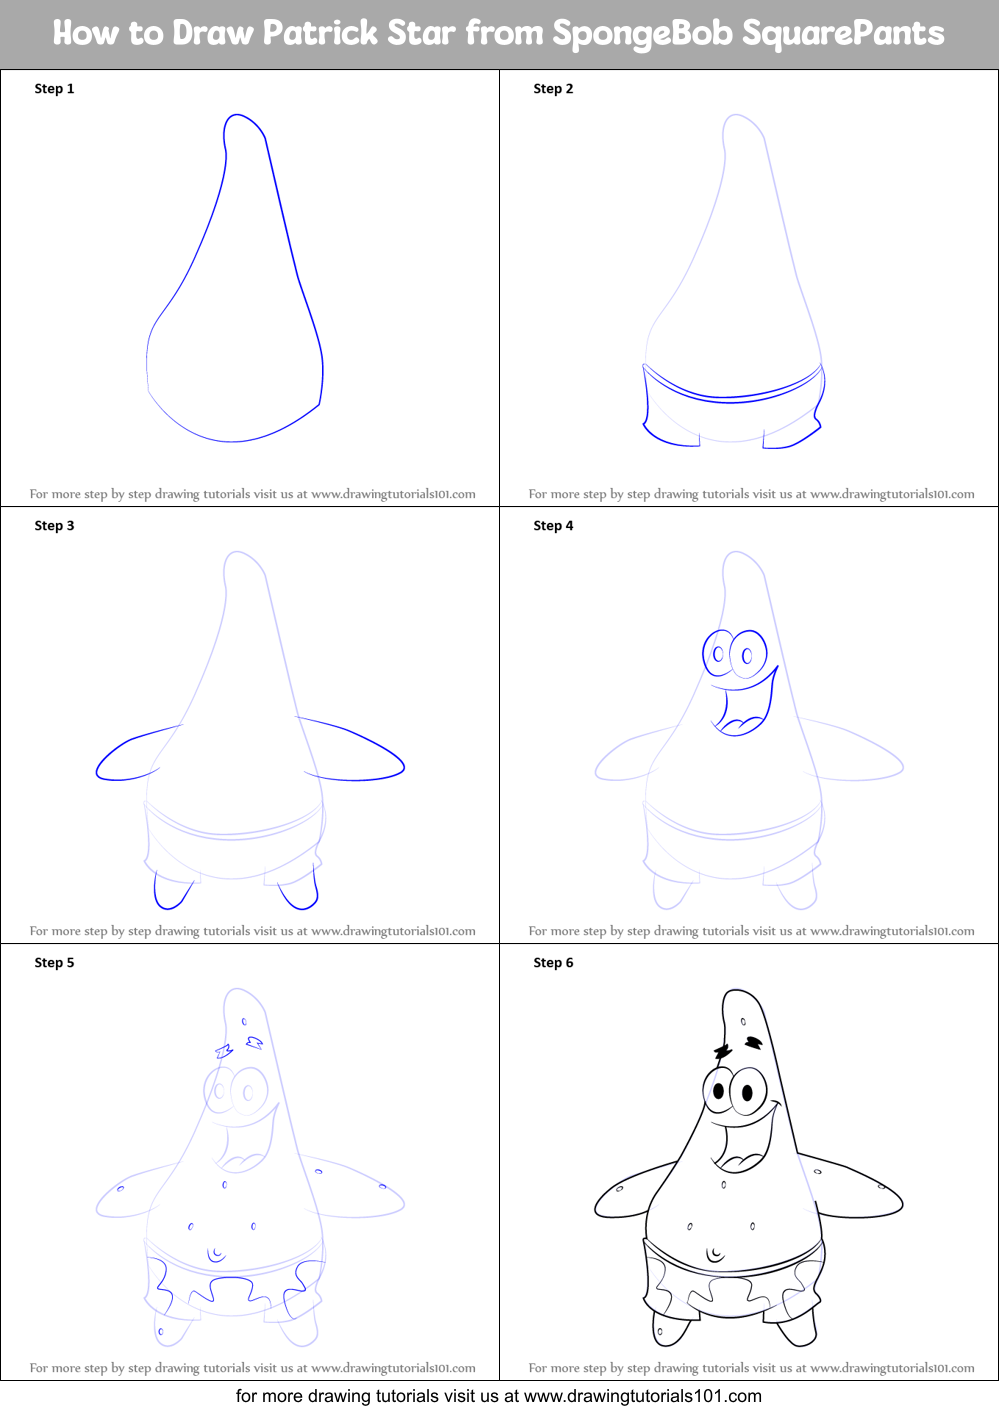 How To Draw Patrick Star From Spongebob Squarepants Printable Step By Step Drawing Sheet